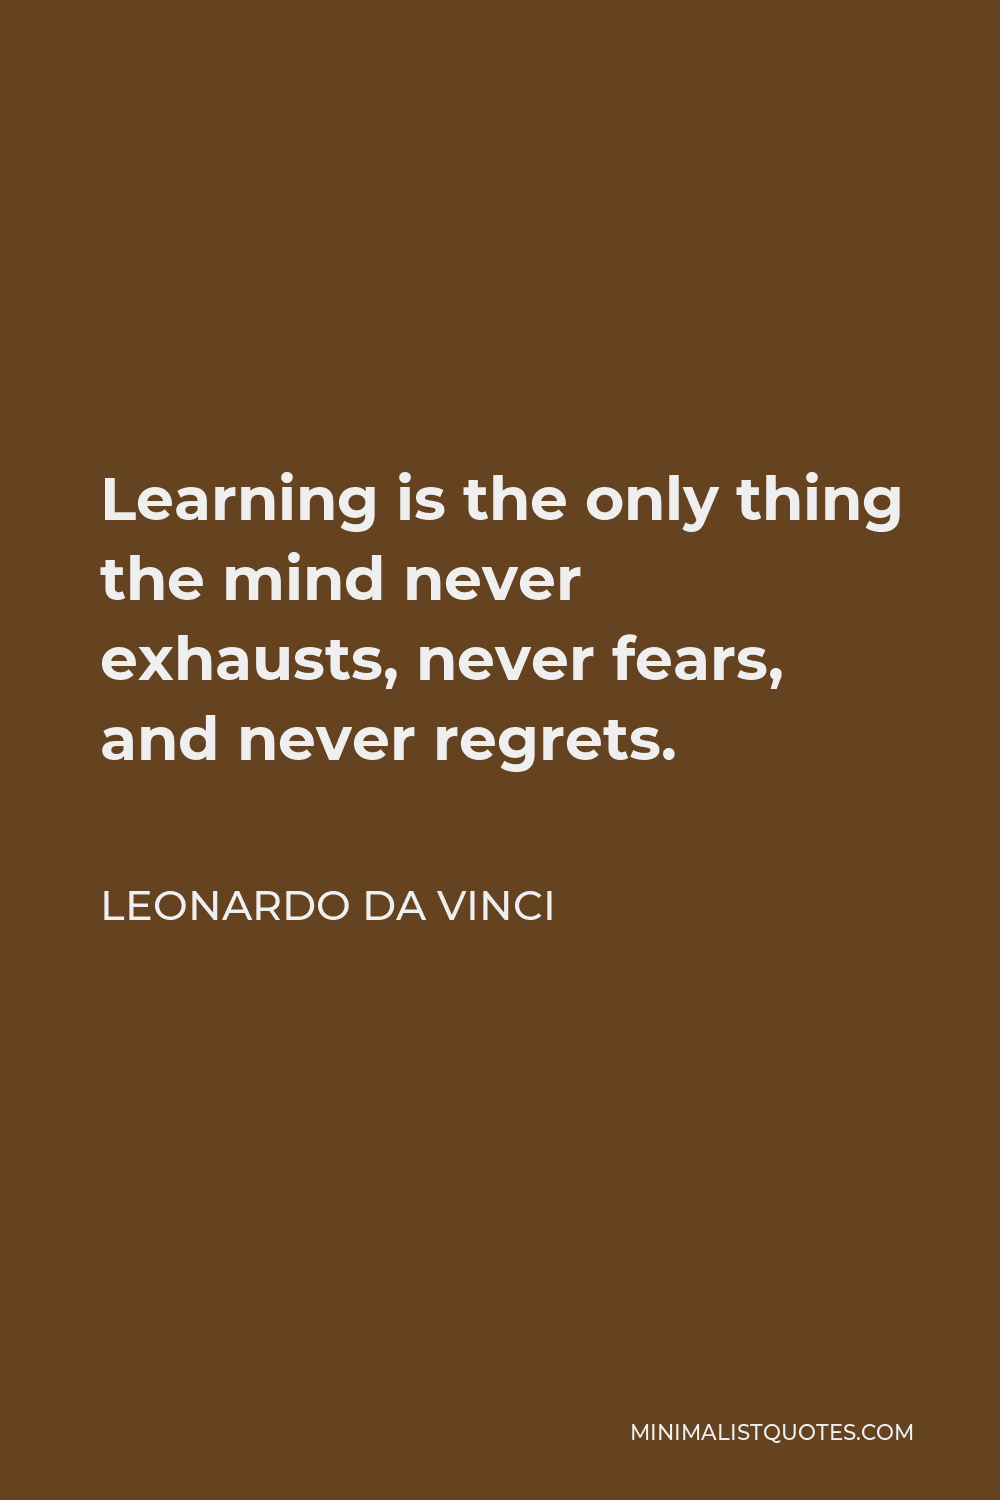 Leonardo da Vinci Quote - Learning is the only thing the mind never exhausts, never fears, and never regrets.